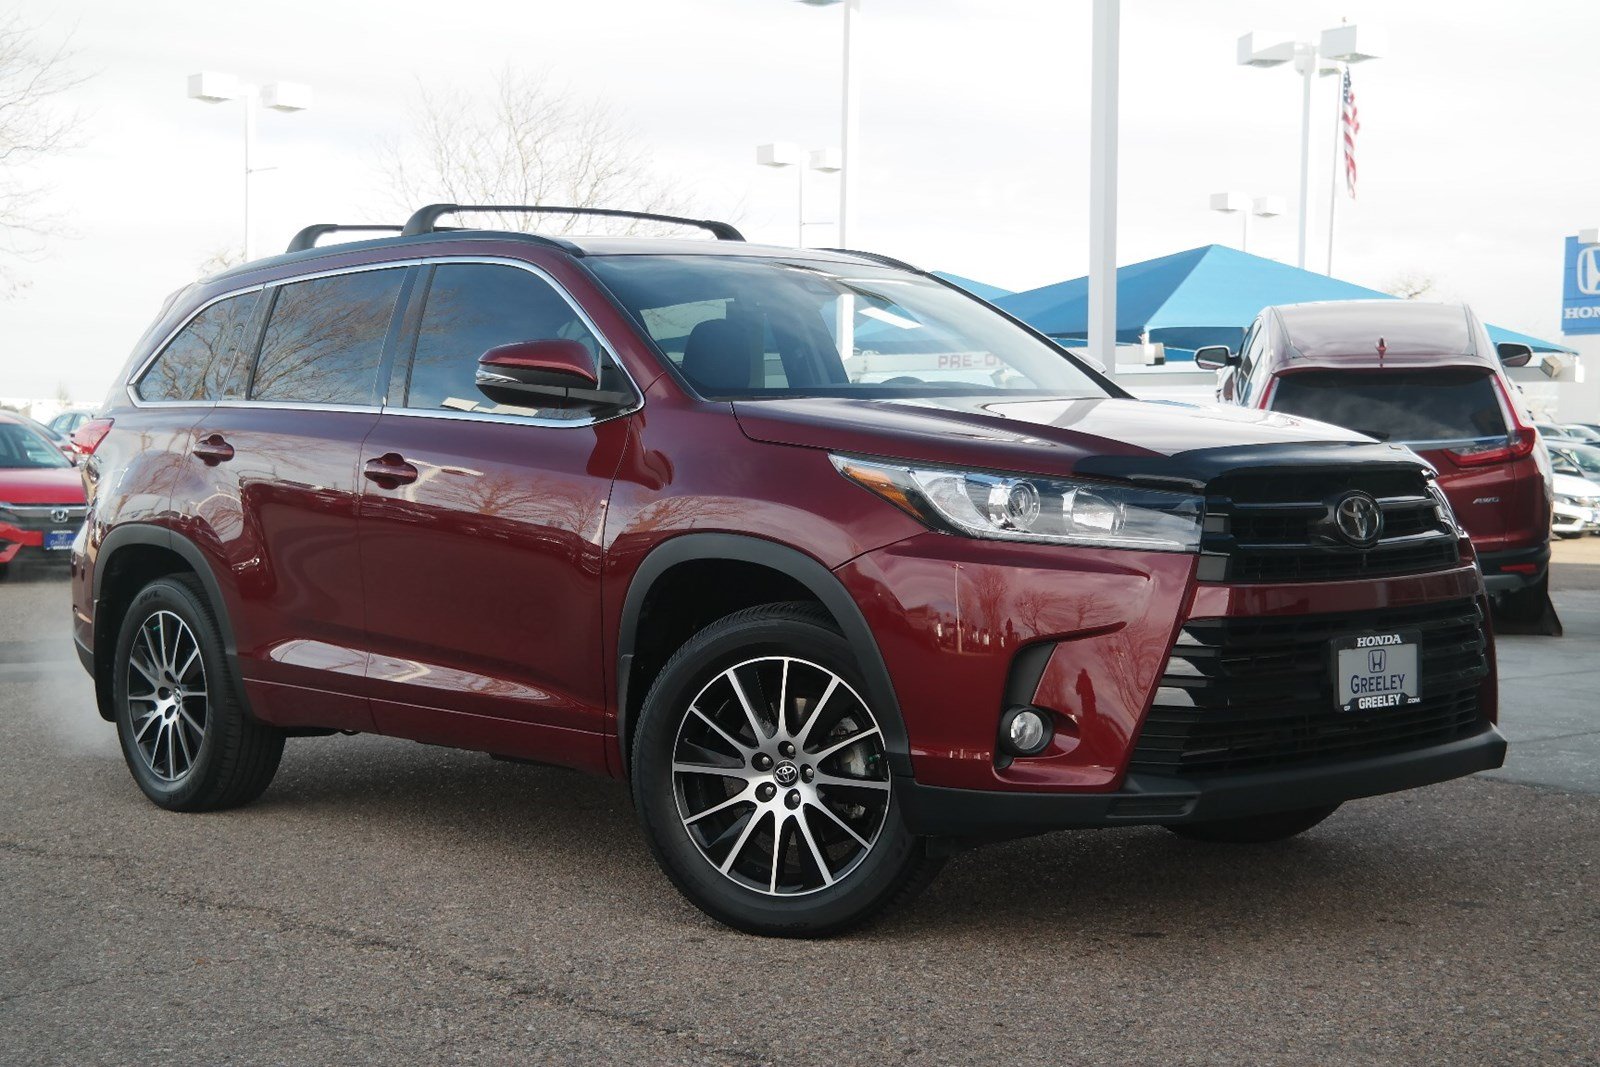 PreOwned 2017 Toyota Highlander SE Sport Utility in